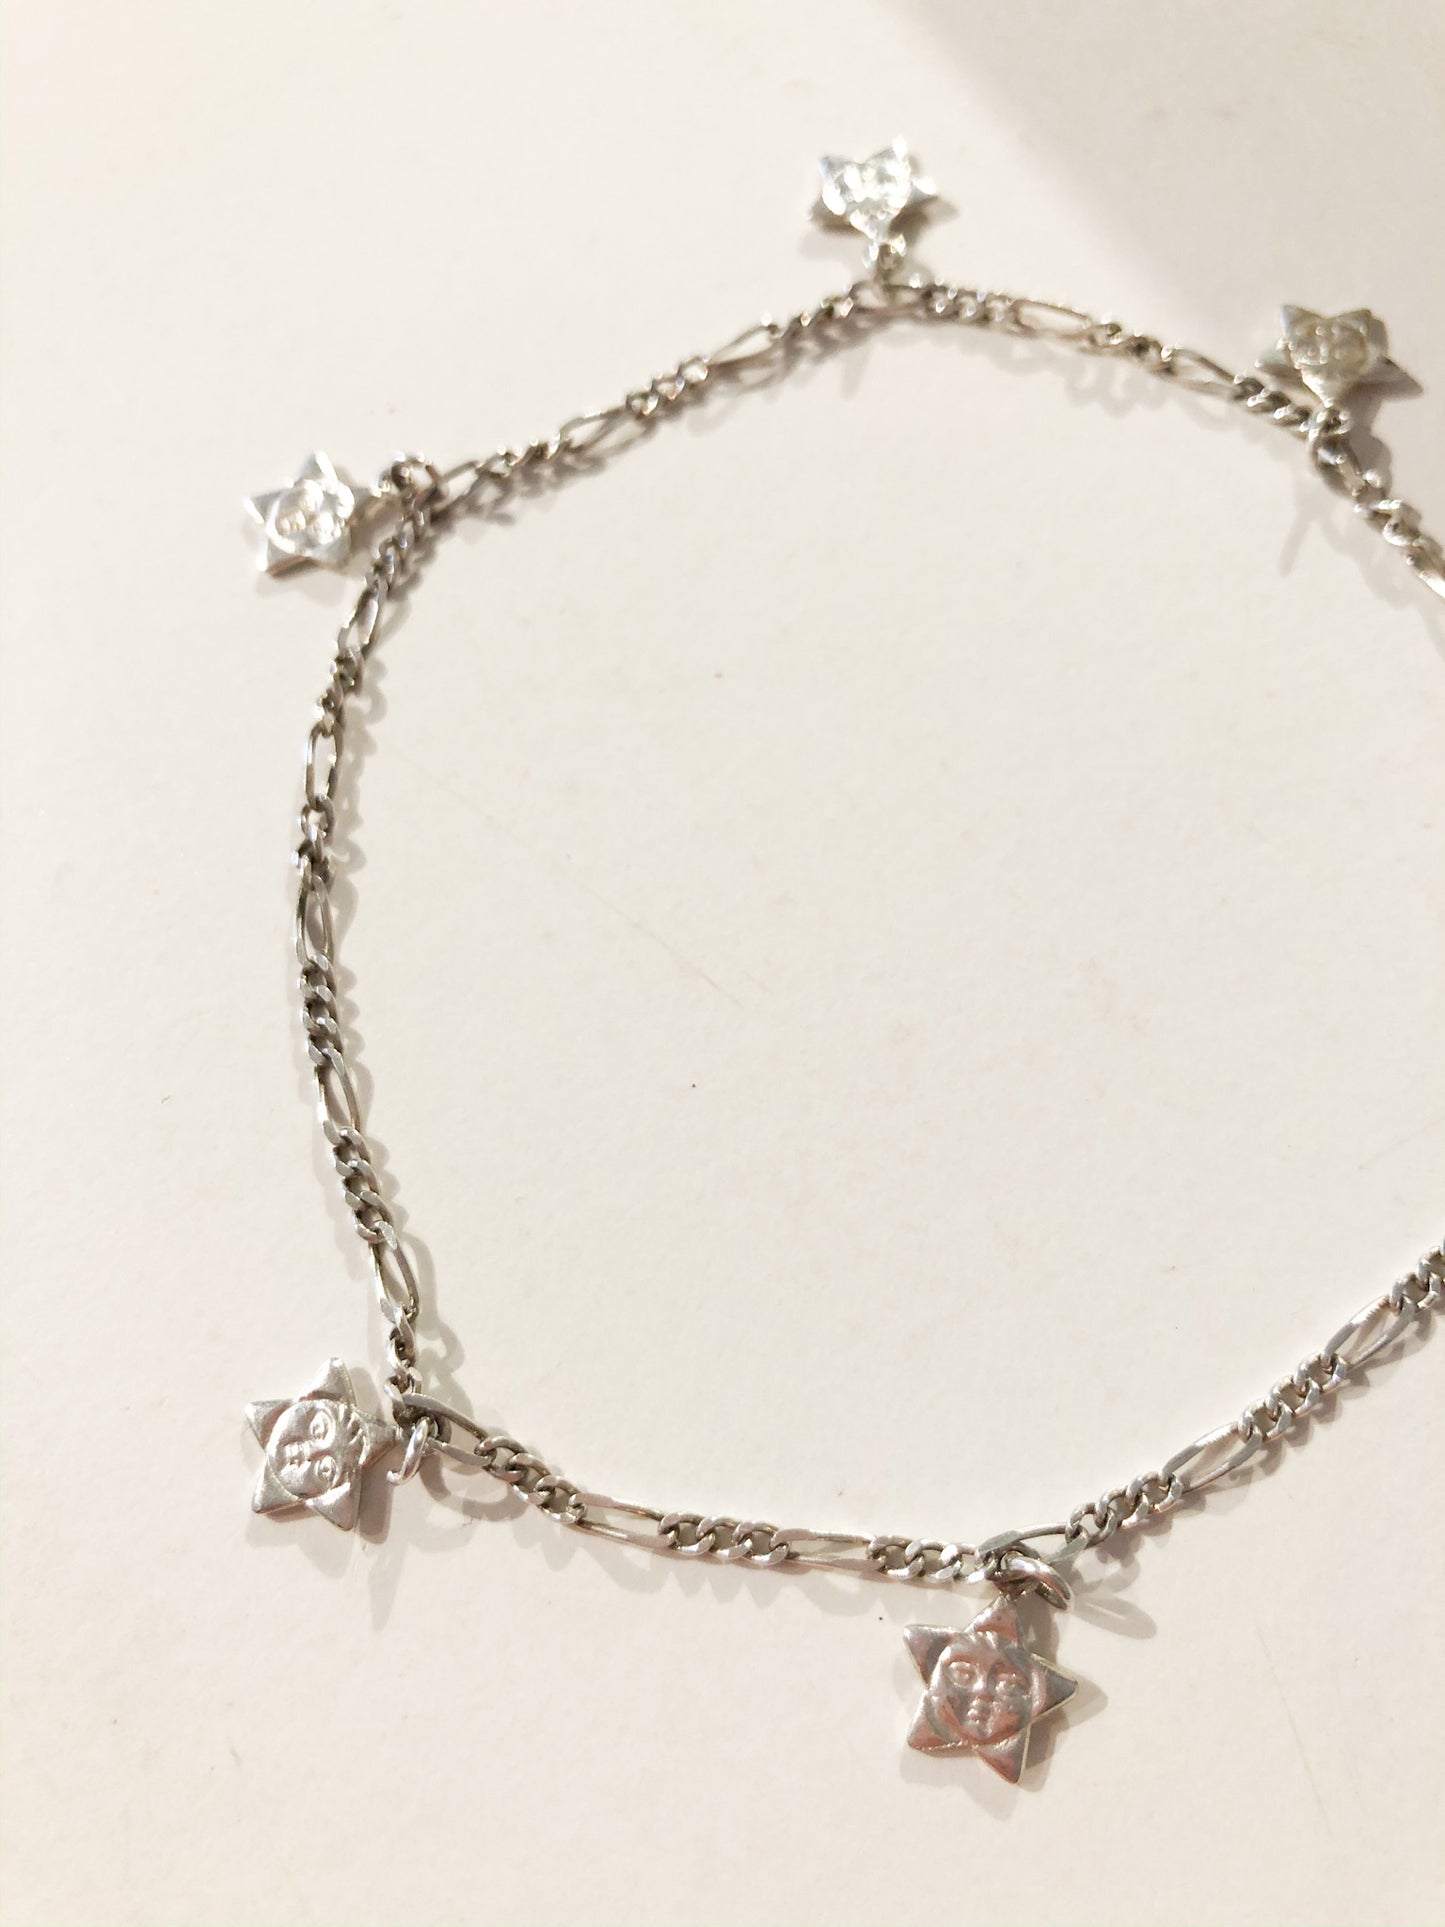 .925 Sterling Silver Star Charm Bracelet - Le Prix Fashion & Consulting